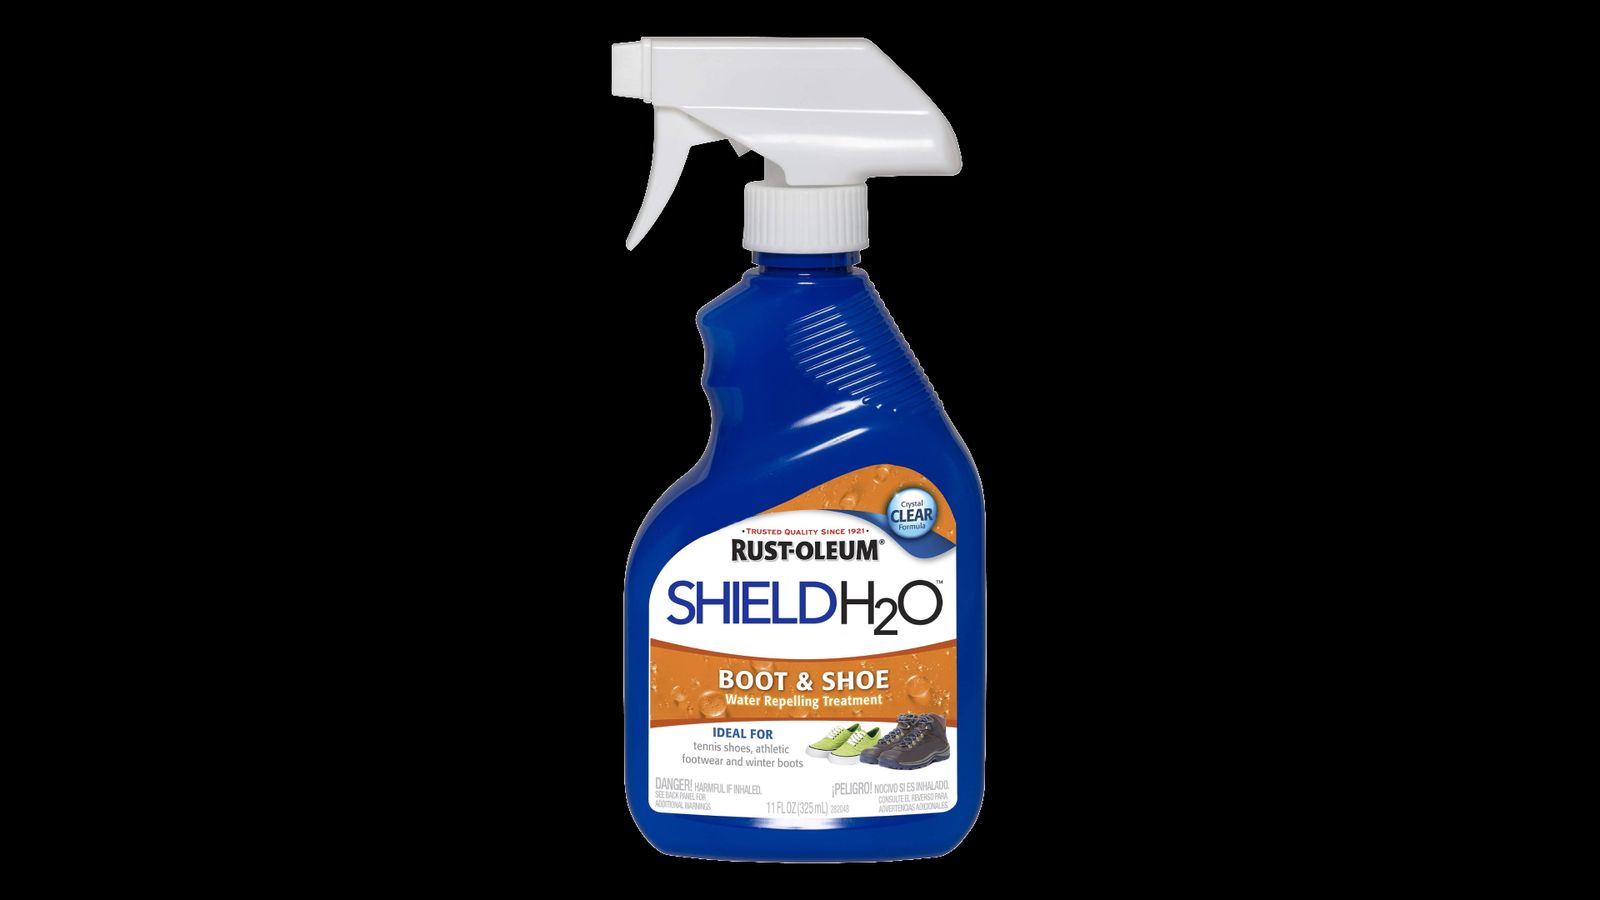 Rust-Oleum Shield H2O product image of a blue bottle with a white spray lid and orange branding.